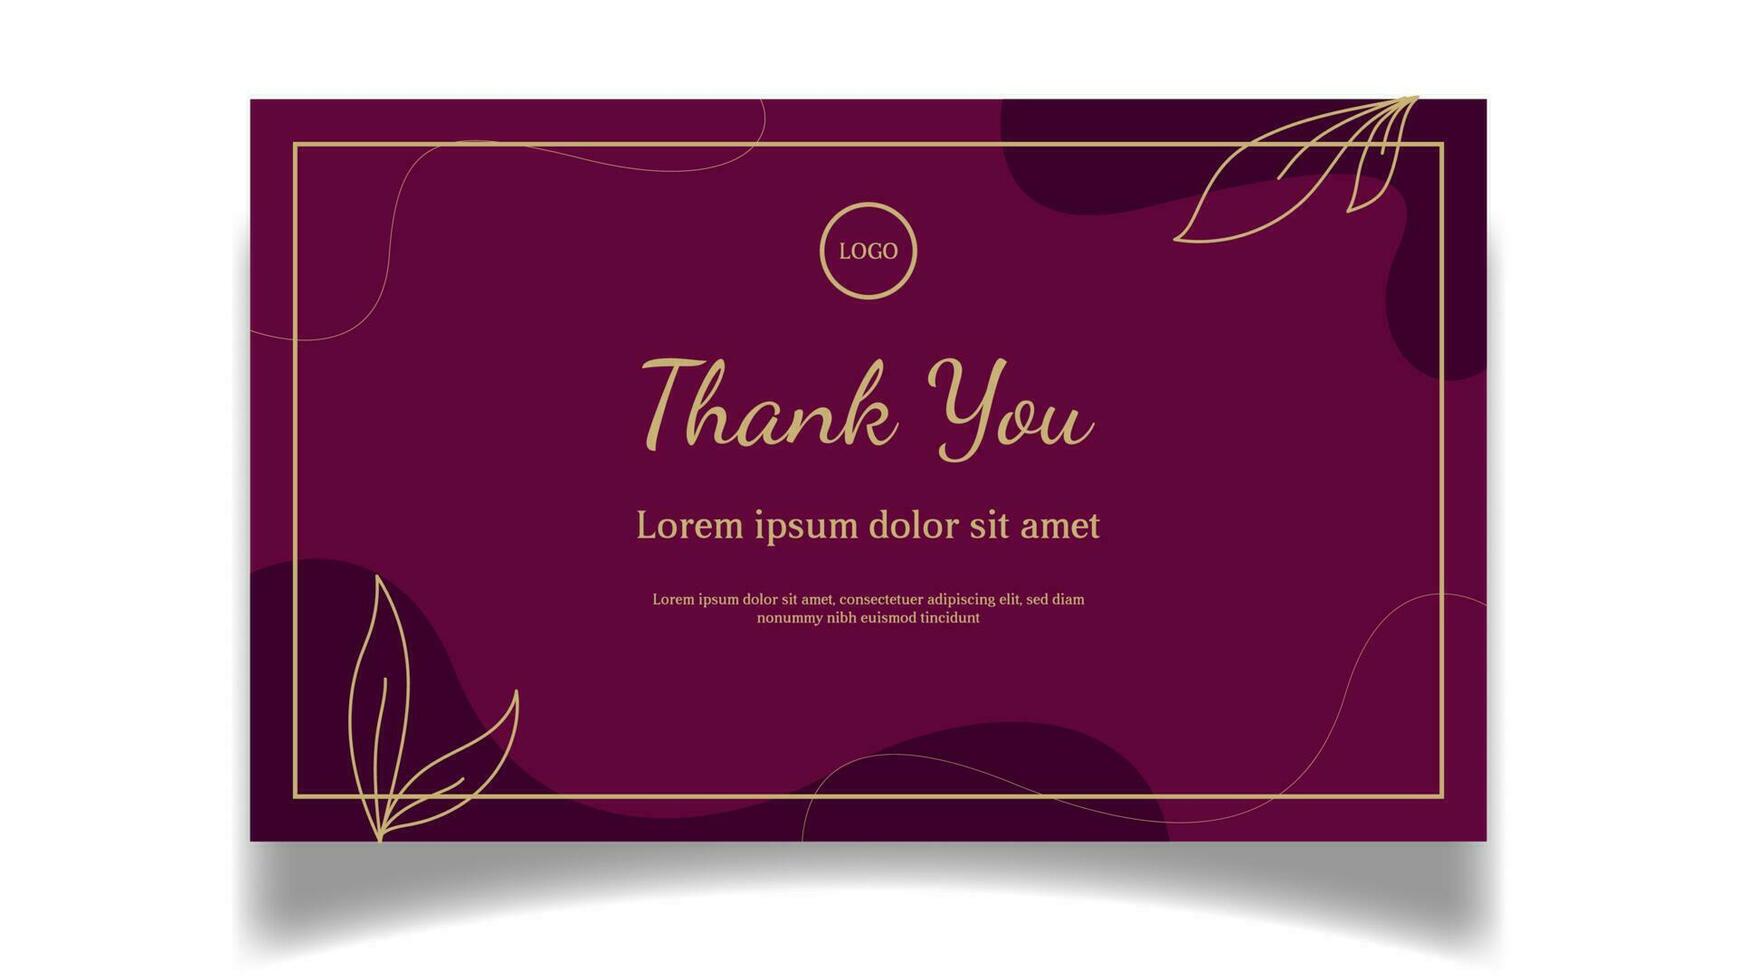 elegant thank you card design vector in red and gold color